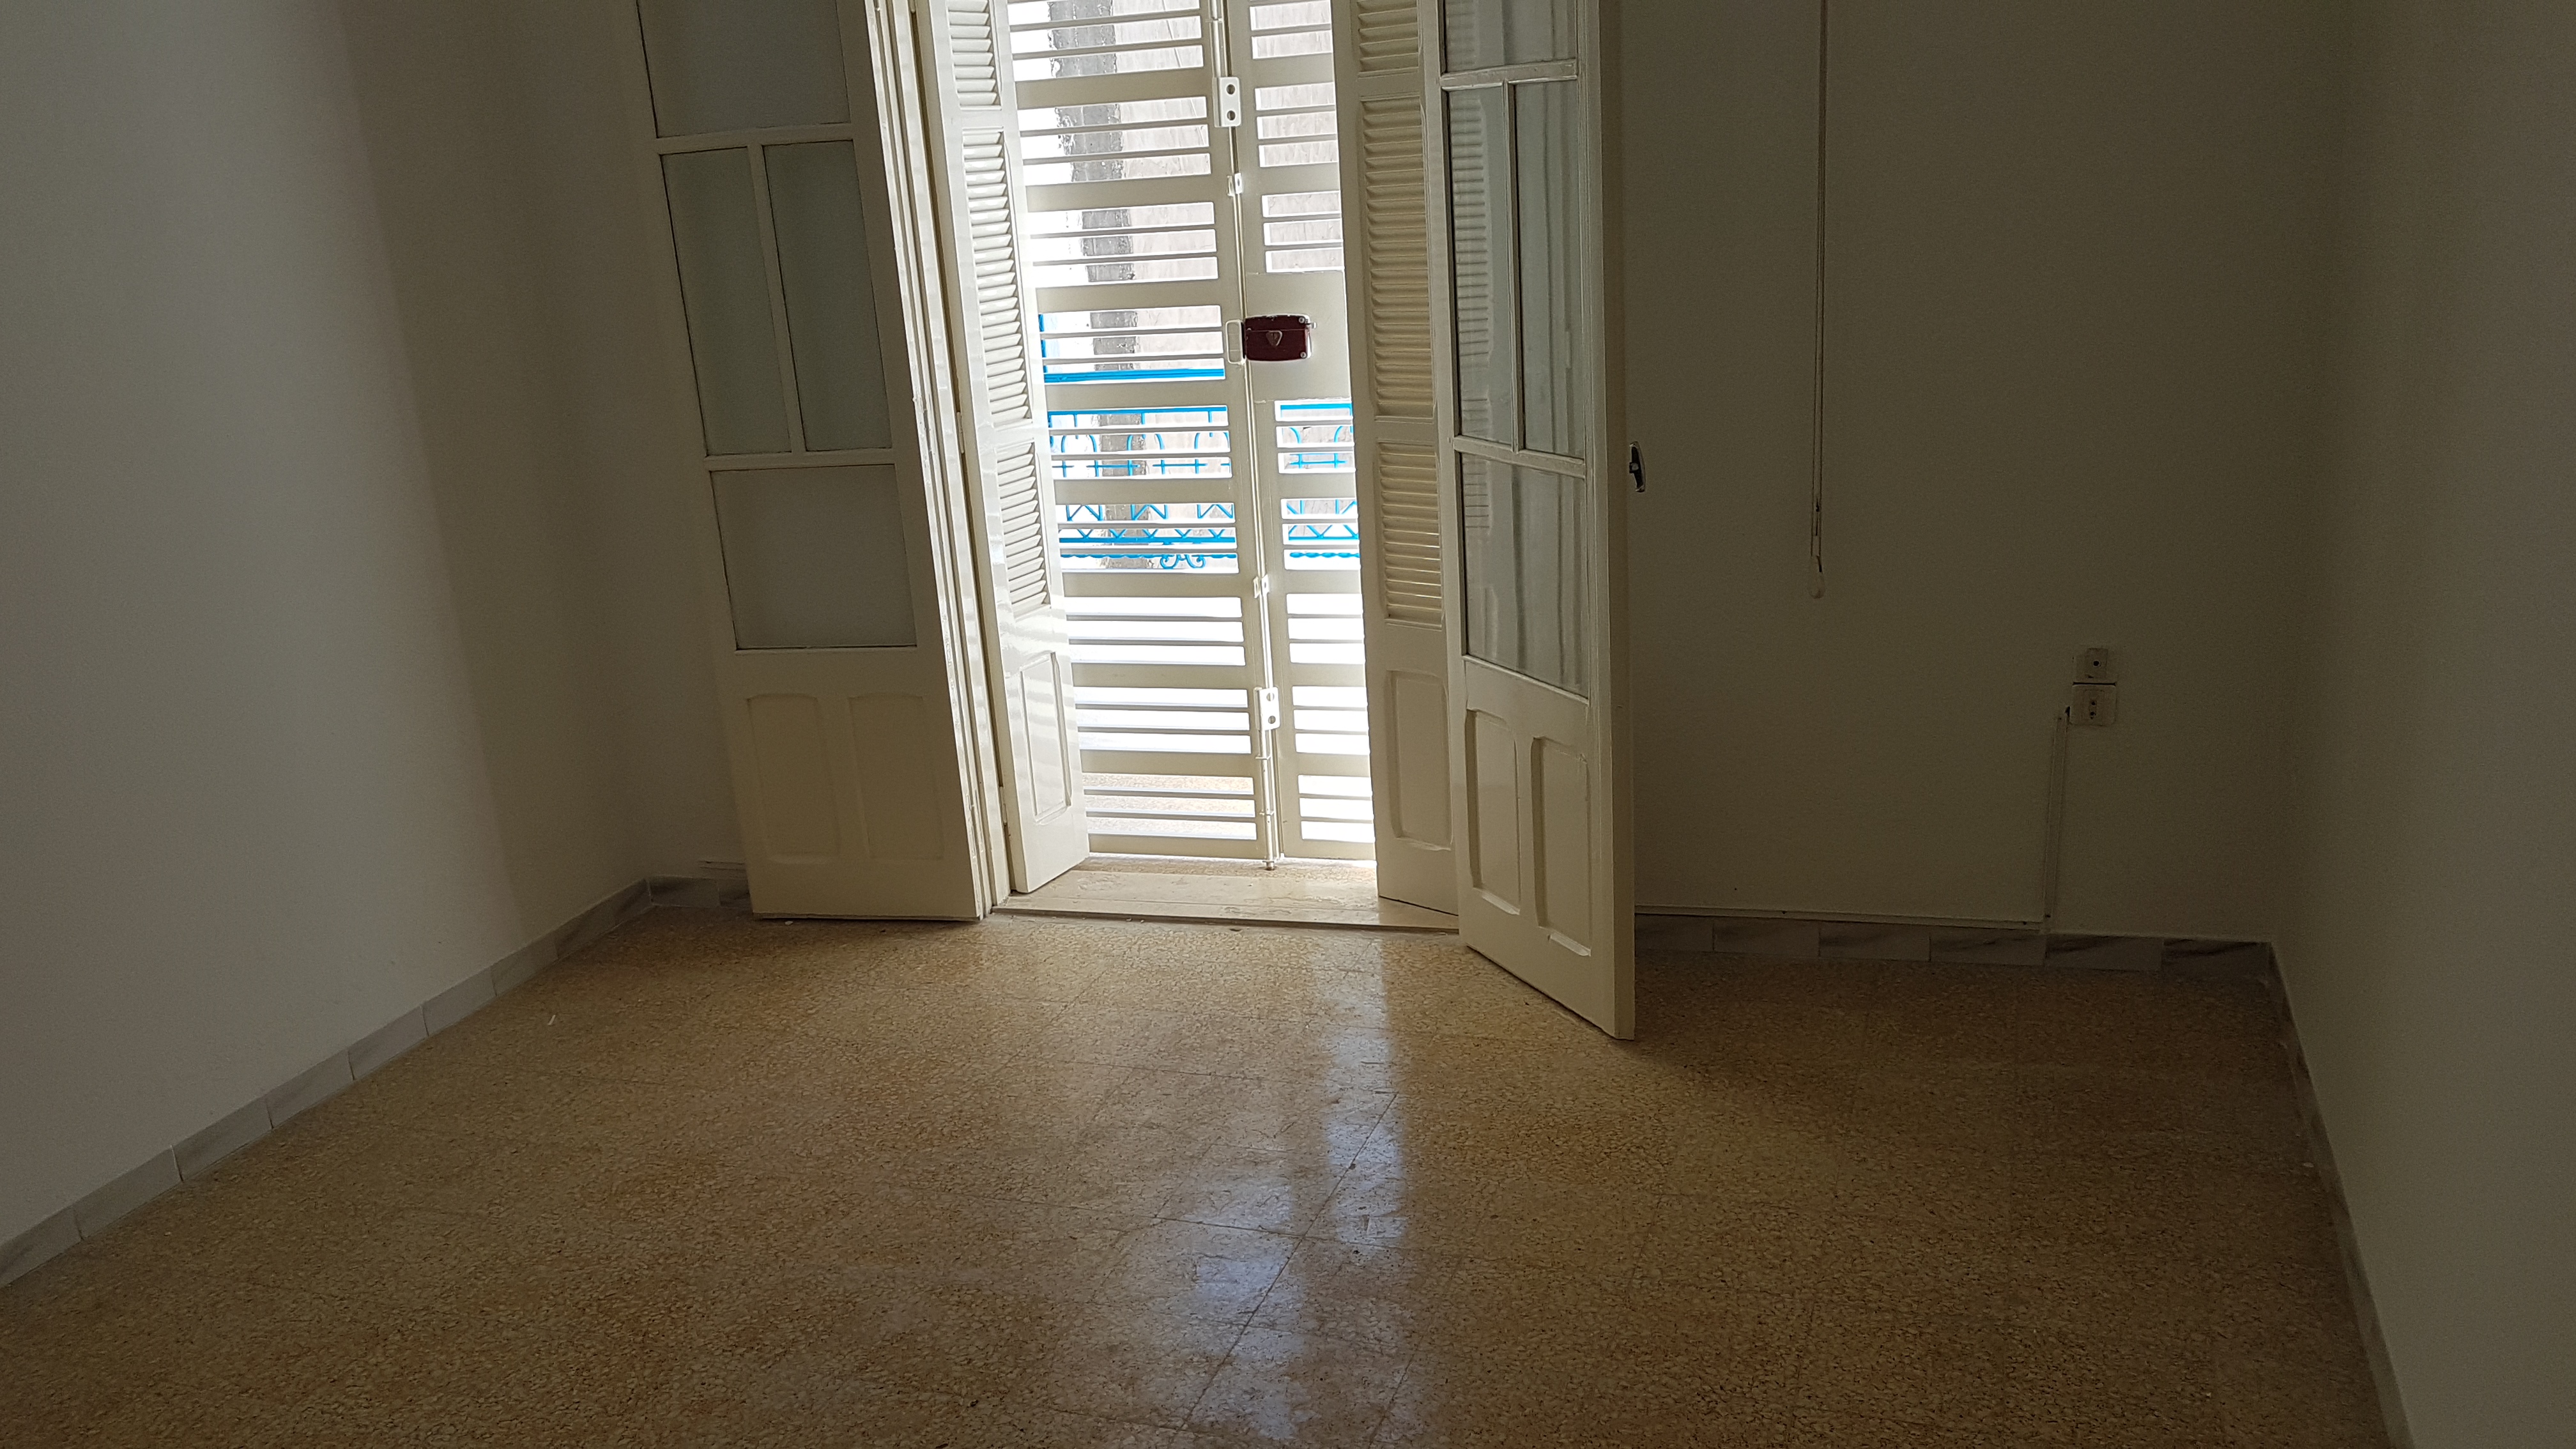 Nabeul Nabeul Location Appart. 3 pices 968eme appartement  nabeul